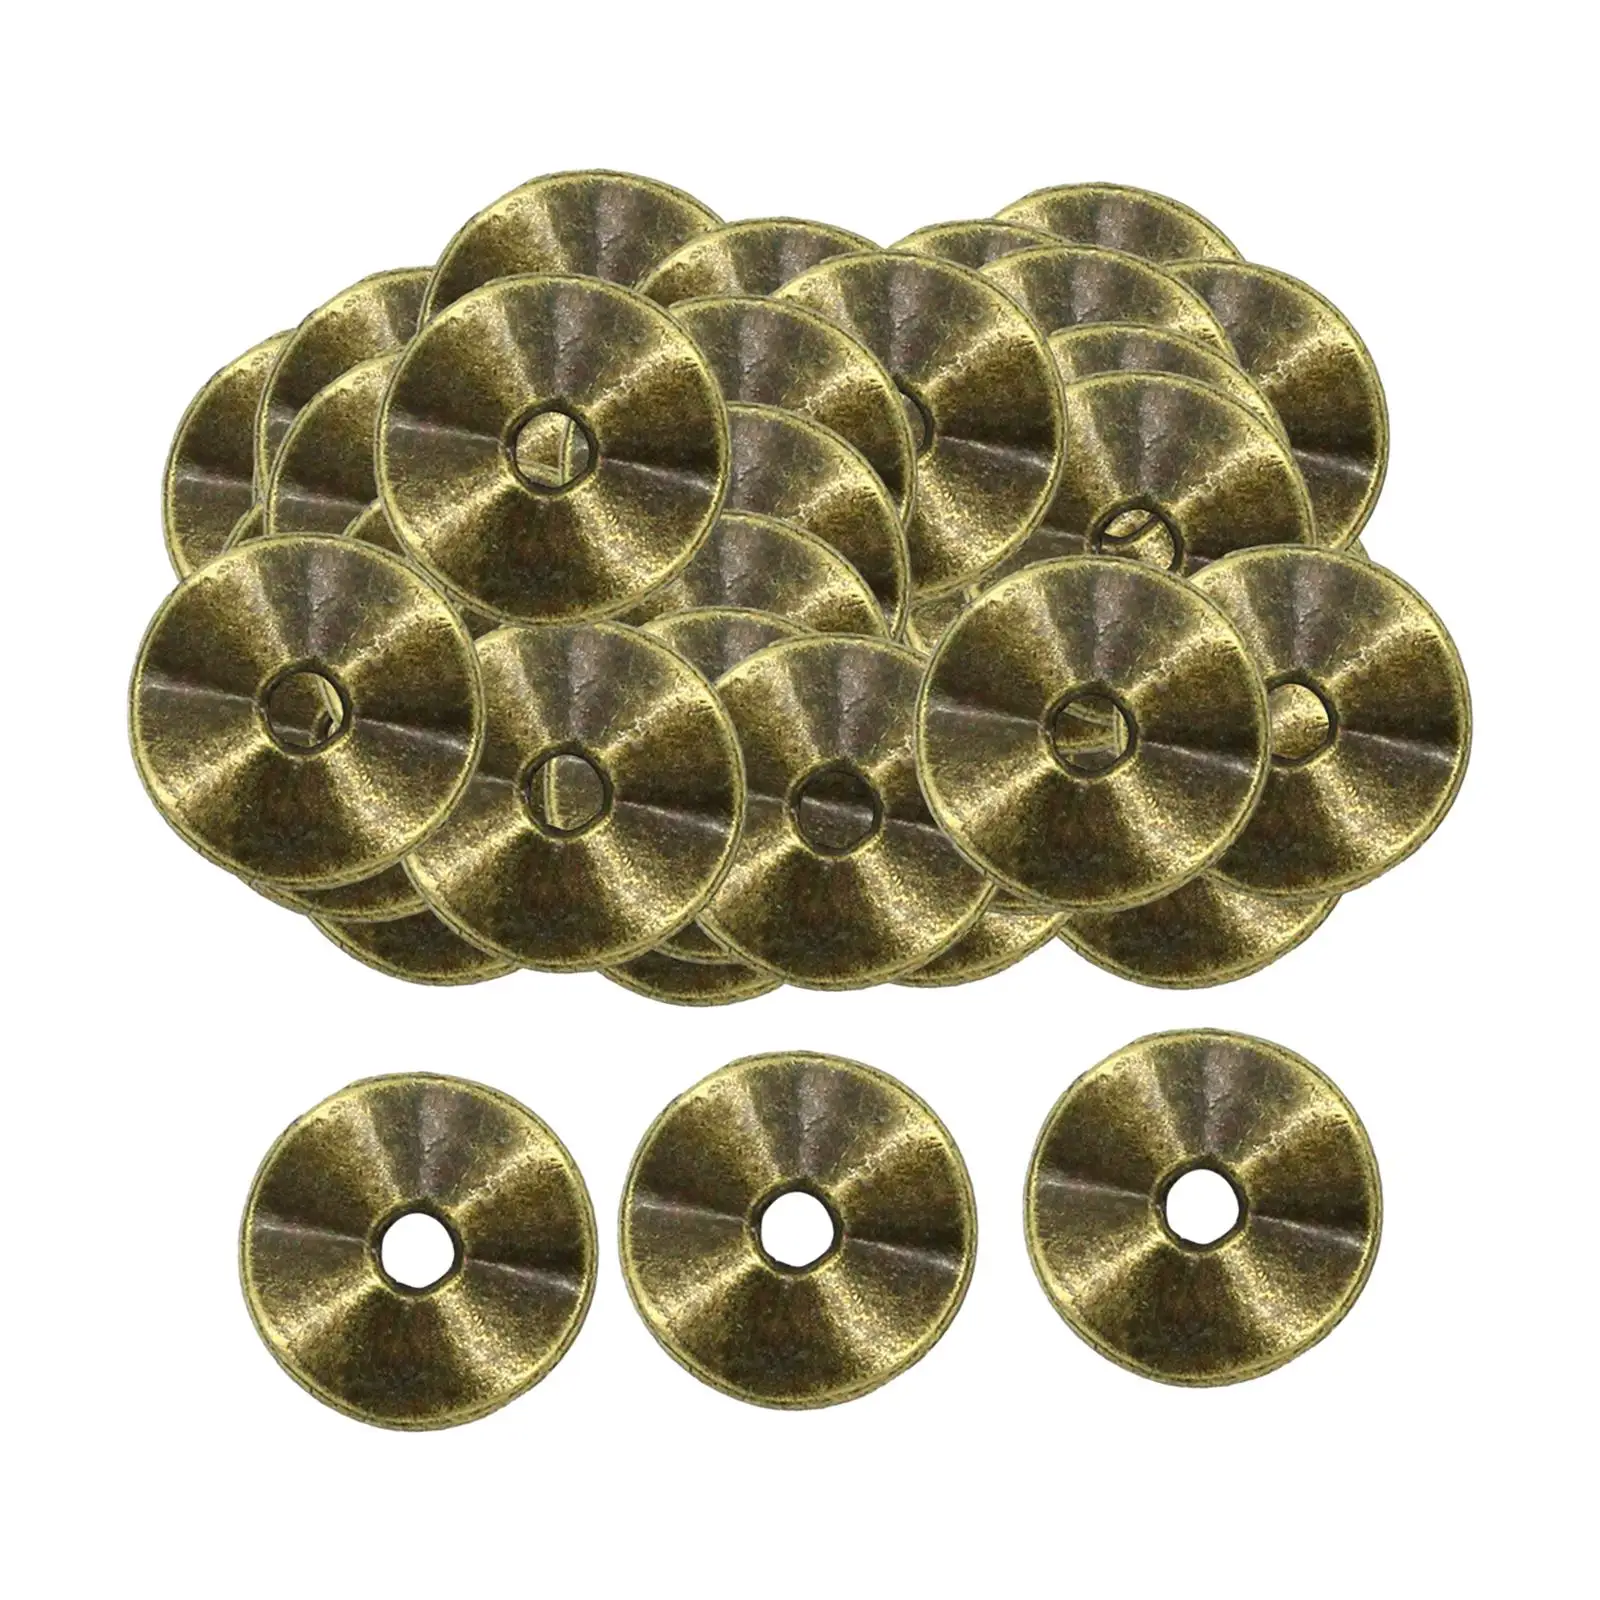 100Pcs Round Spacer Beads Accessory Ancient Bronze Color Metal 10mm for Necklace Bracelet Anklet Pendant Handmade Jewelry Making